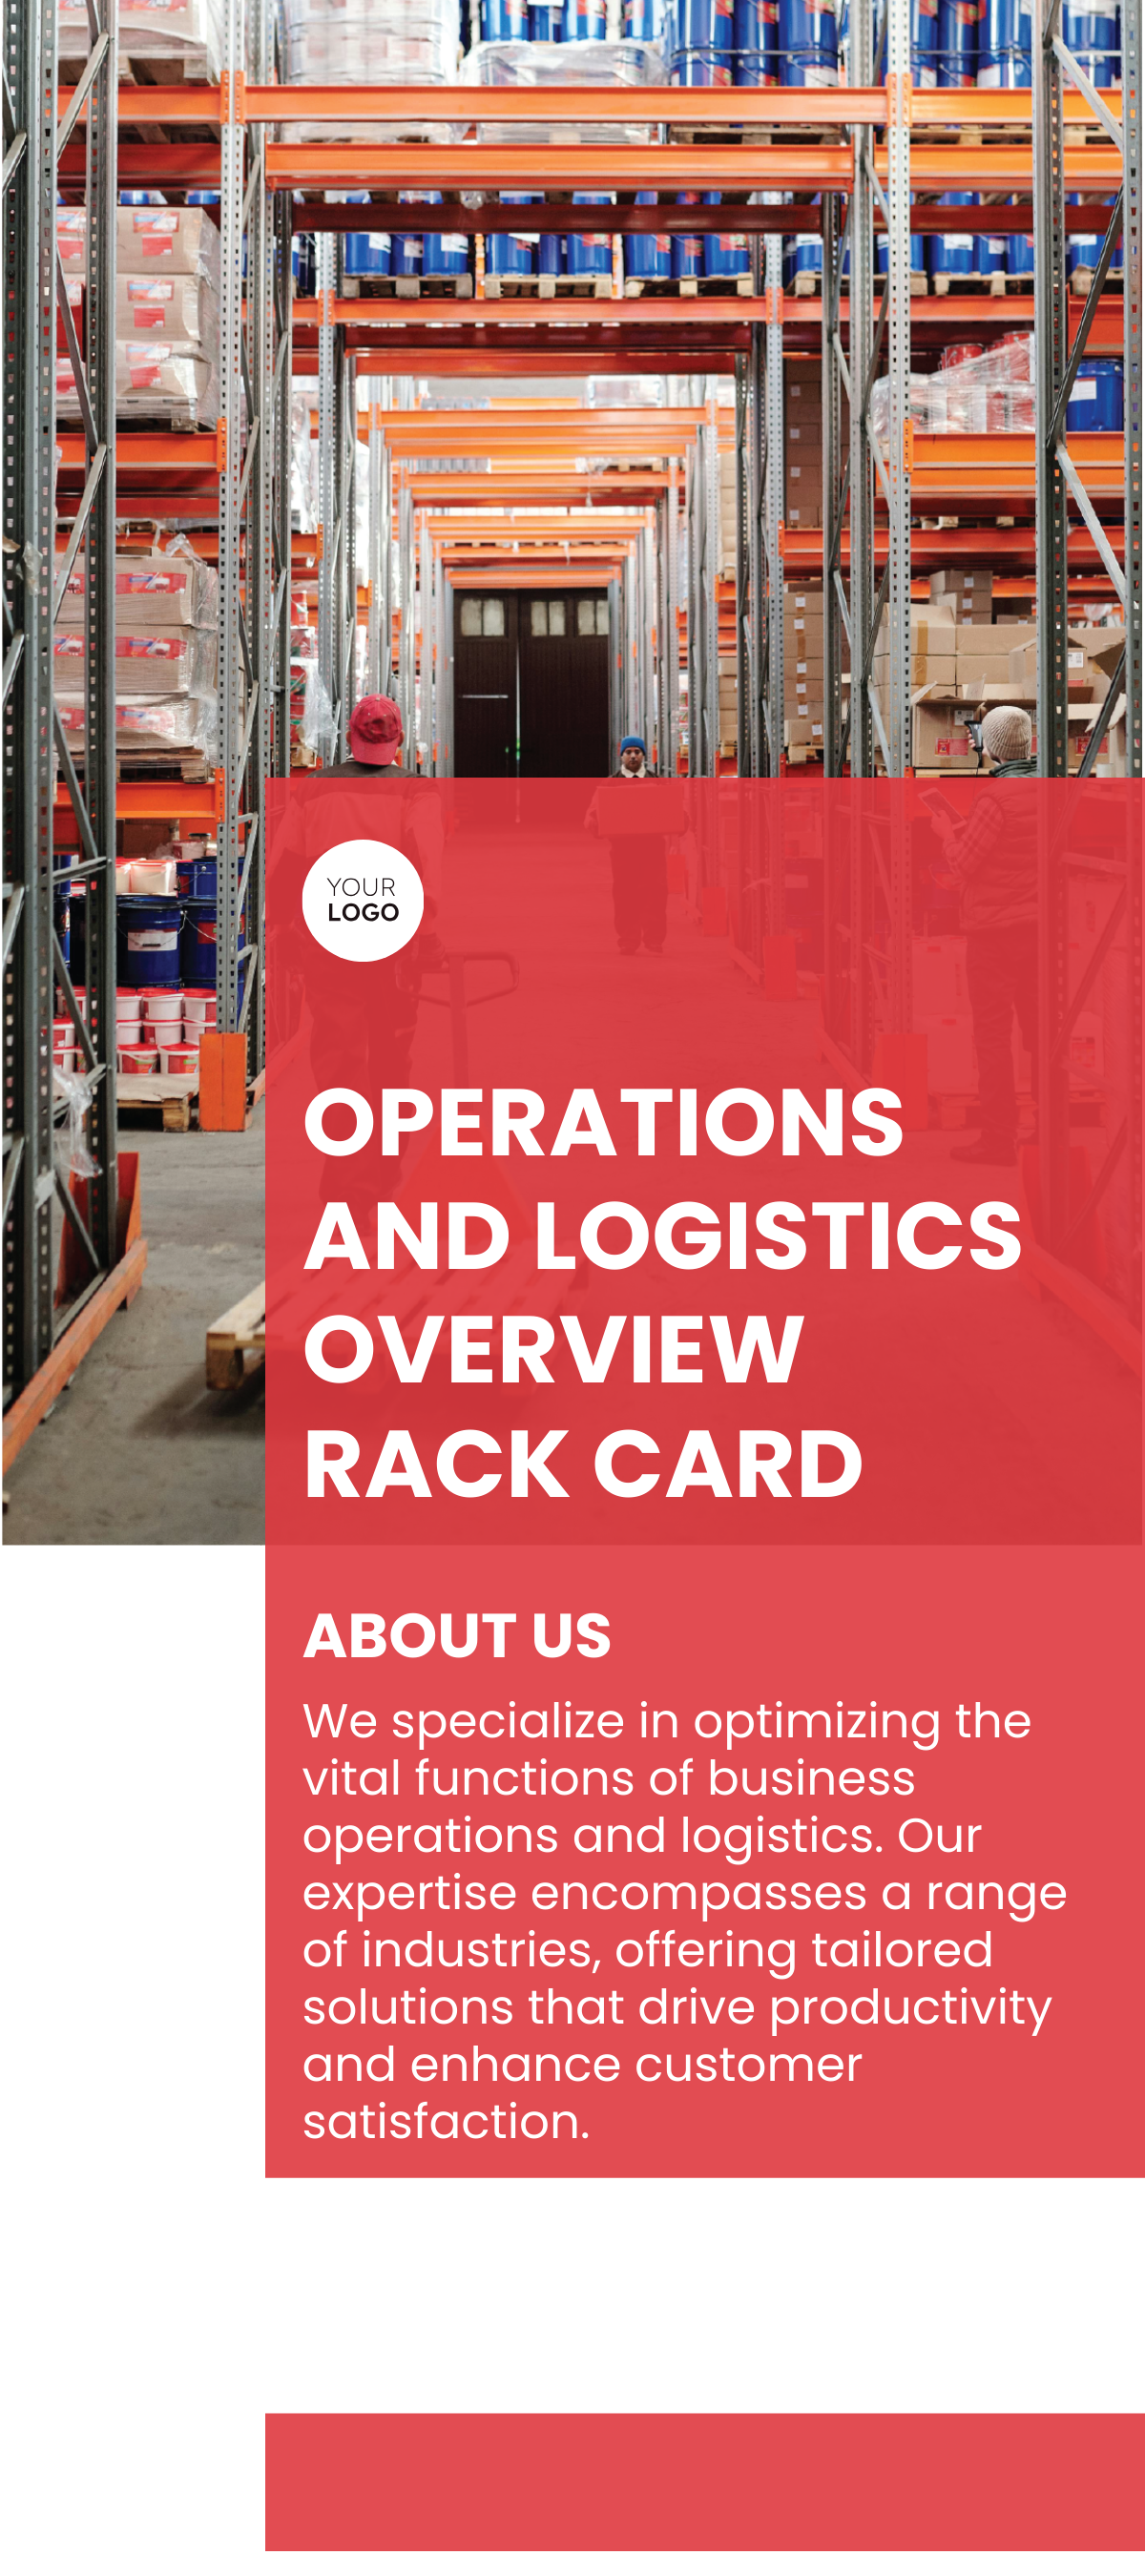 Operations and Logistics Overview Rack Card